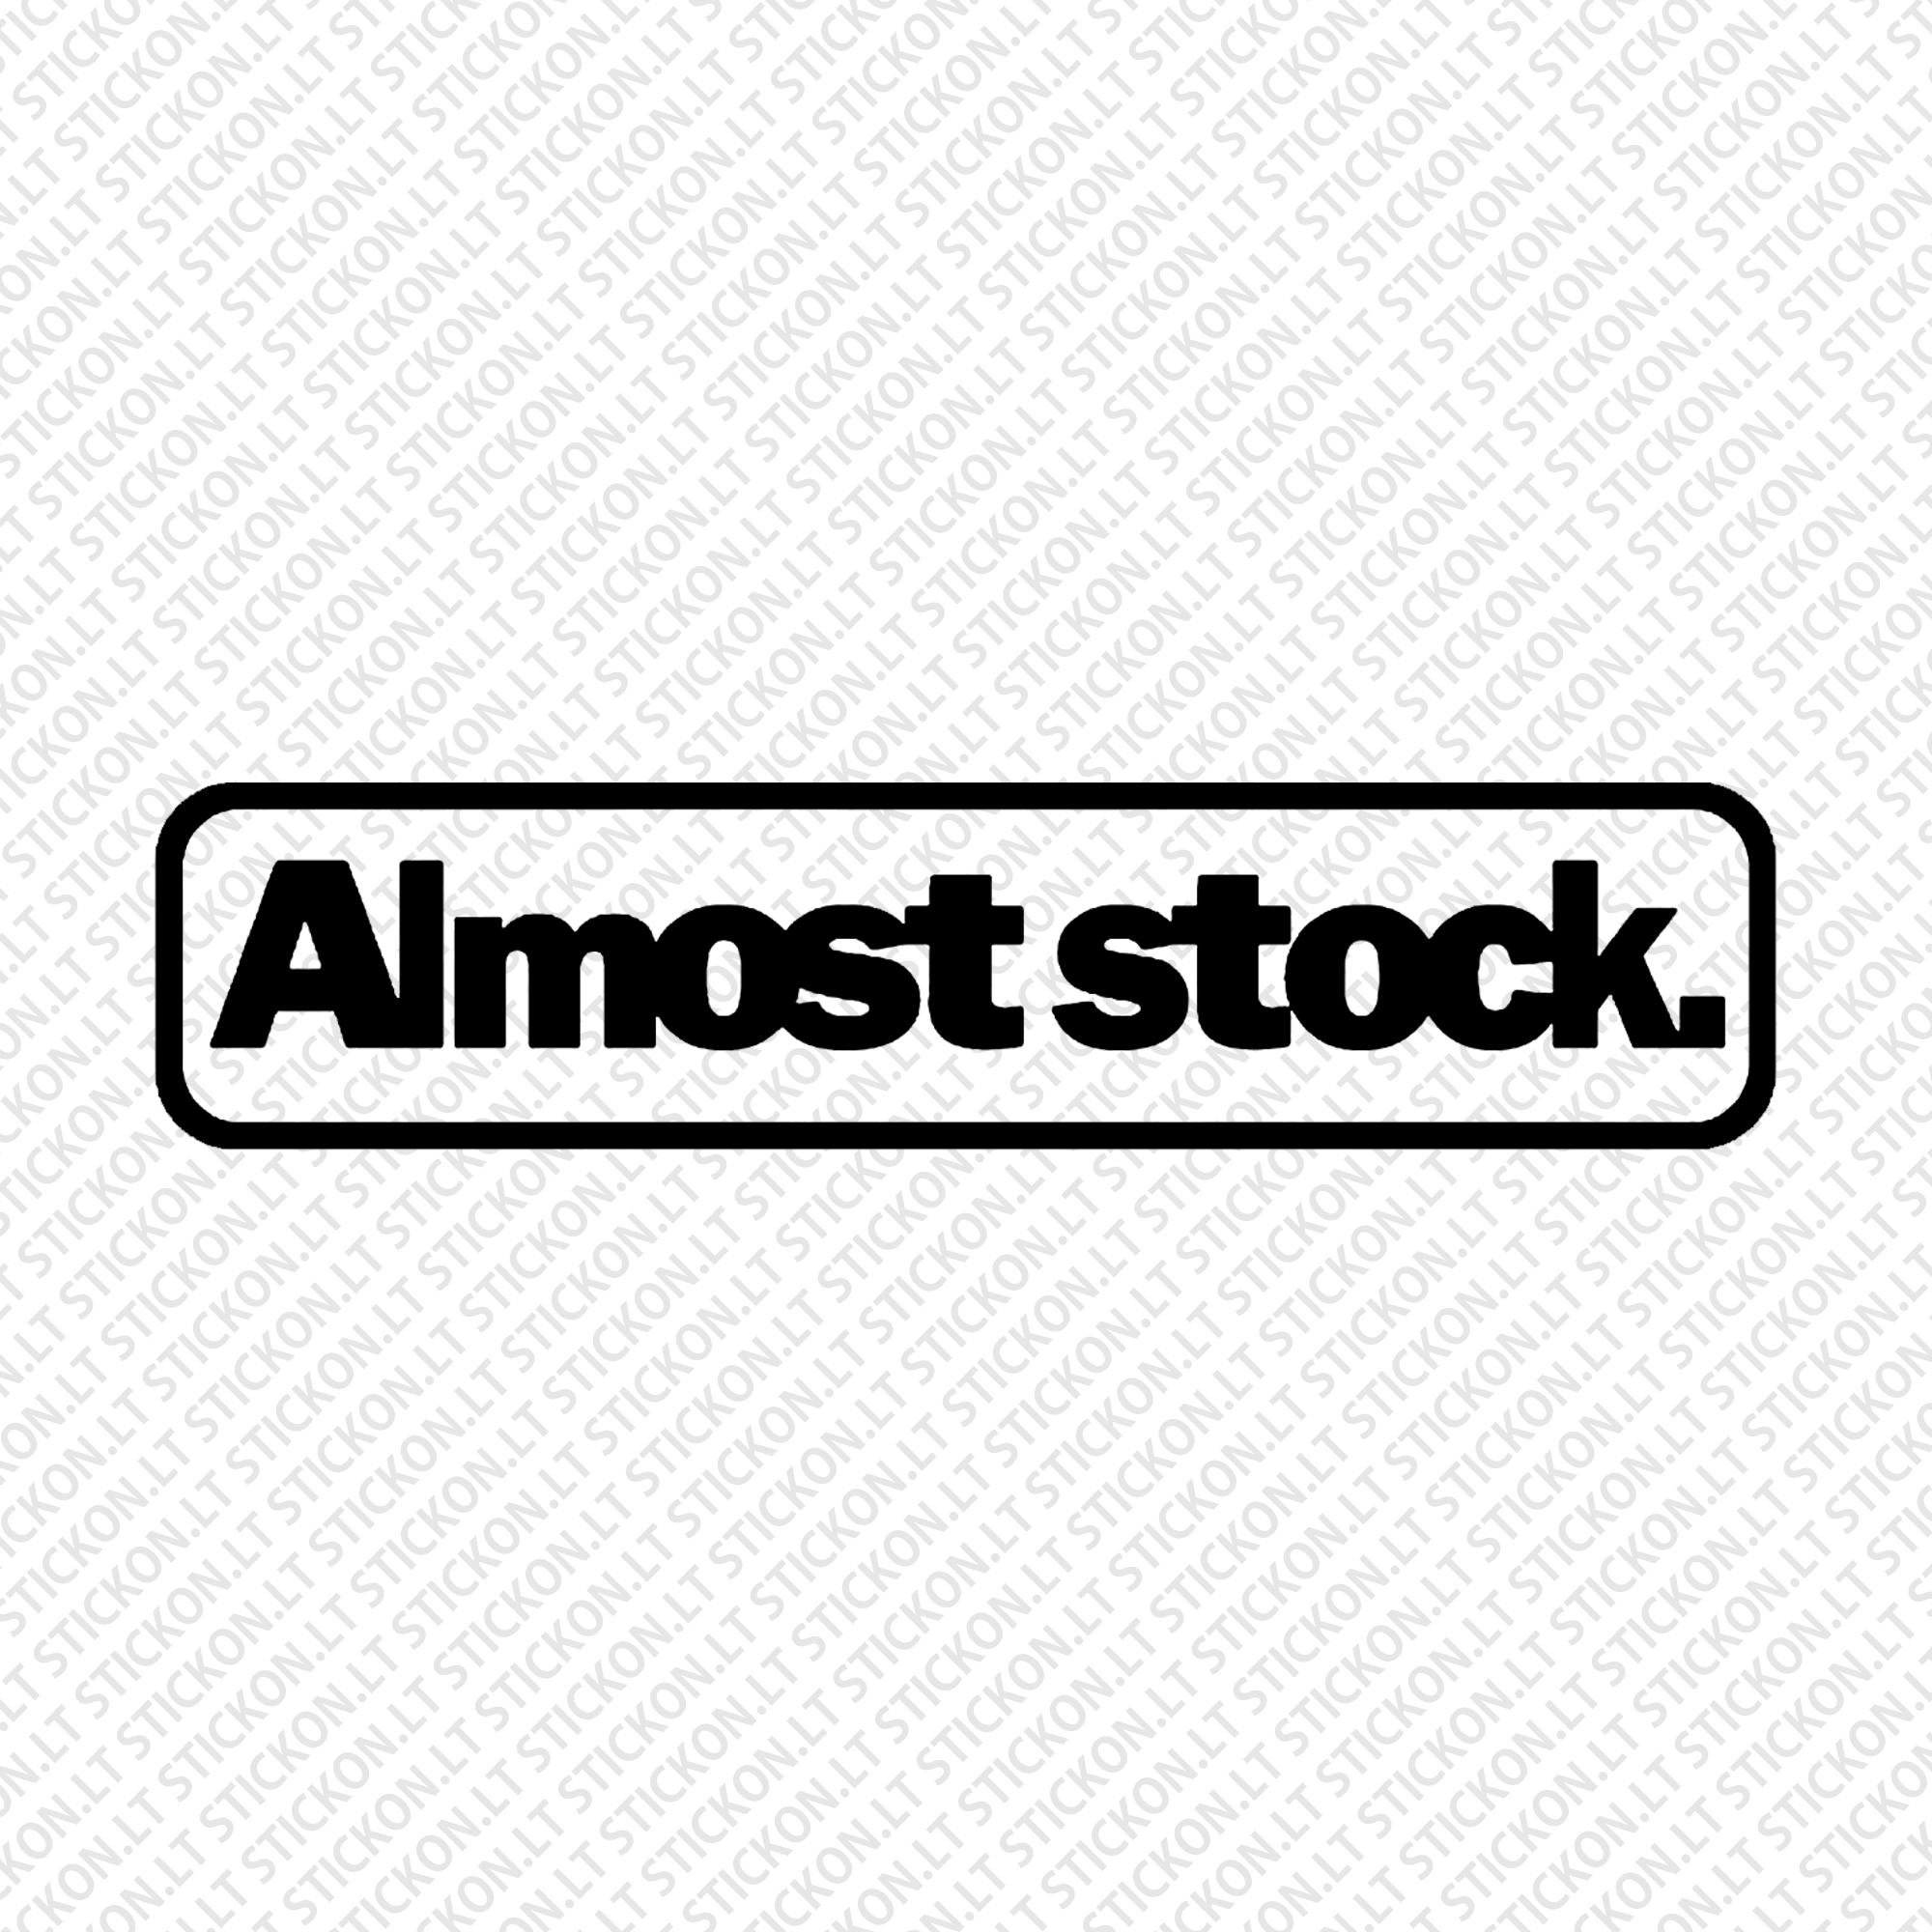 "Almost stock."